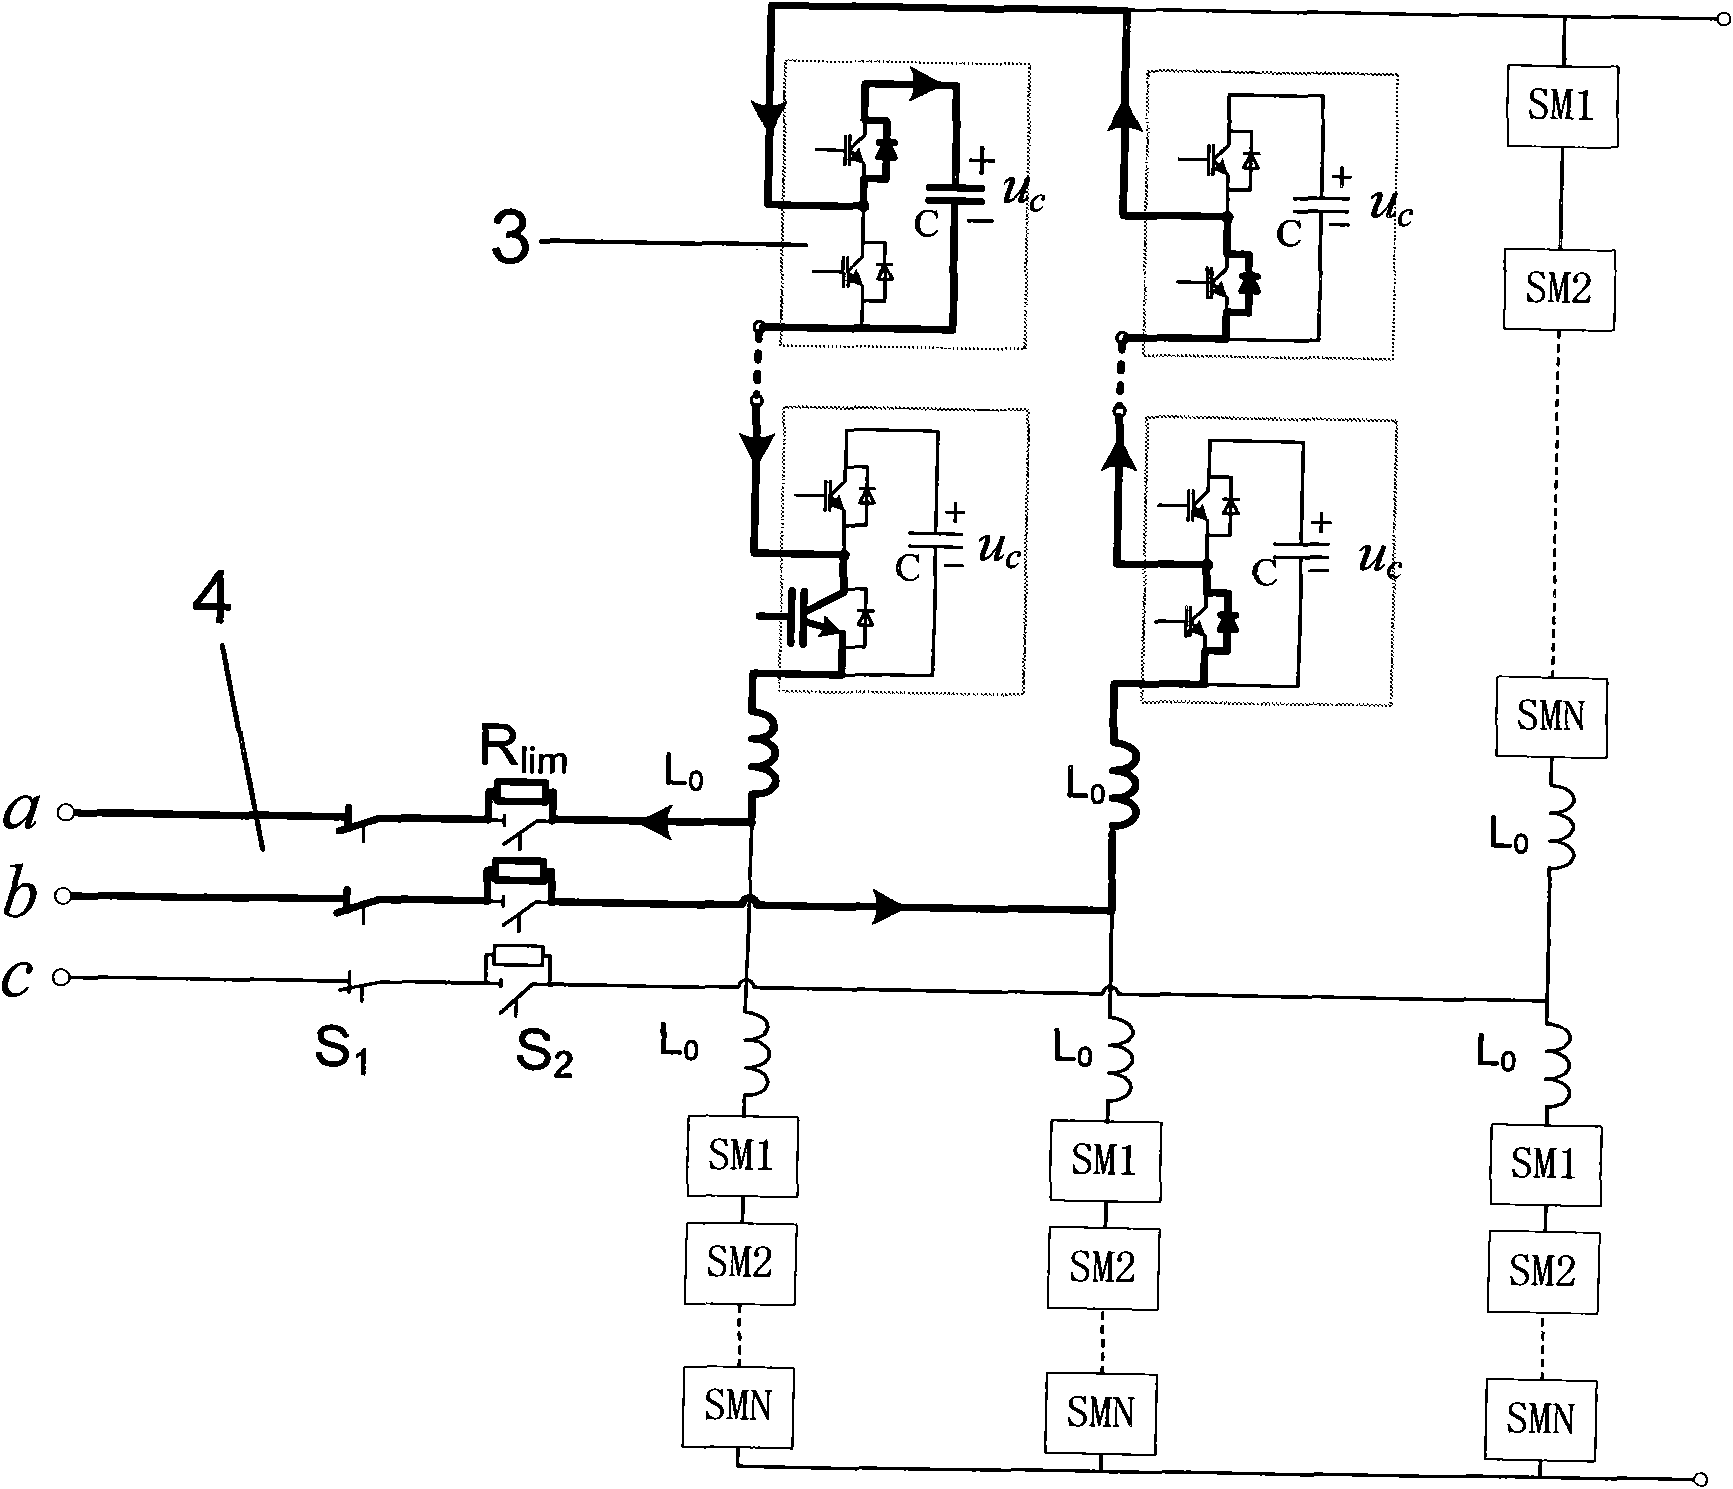 Method for starting three-phase modular multilevel inverter without auxiliary DC power supply